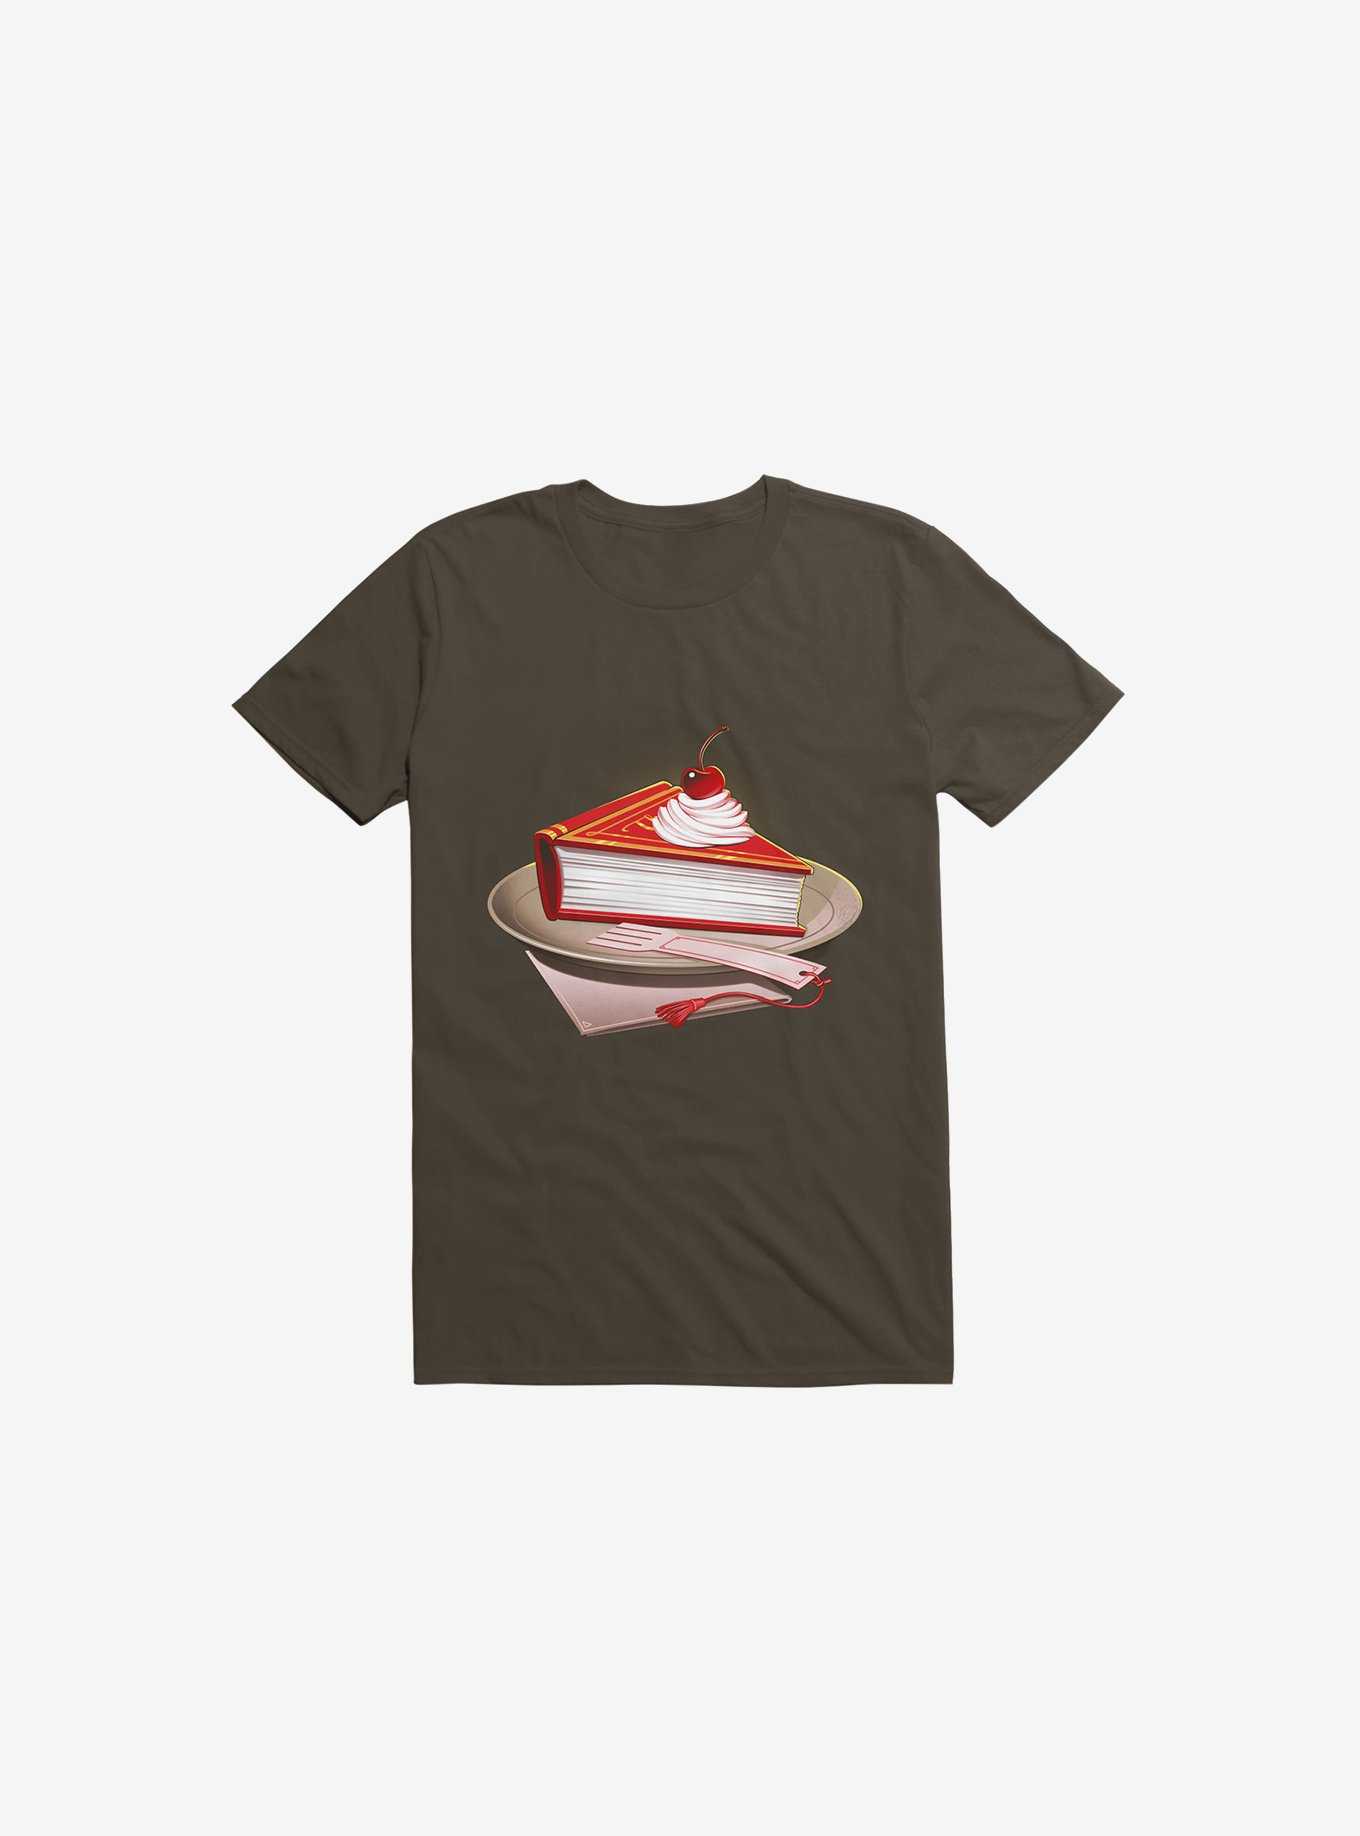 Food For The Brain Brown T-Shirt, , hi-res